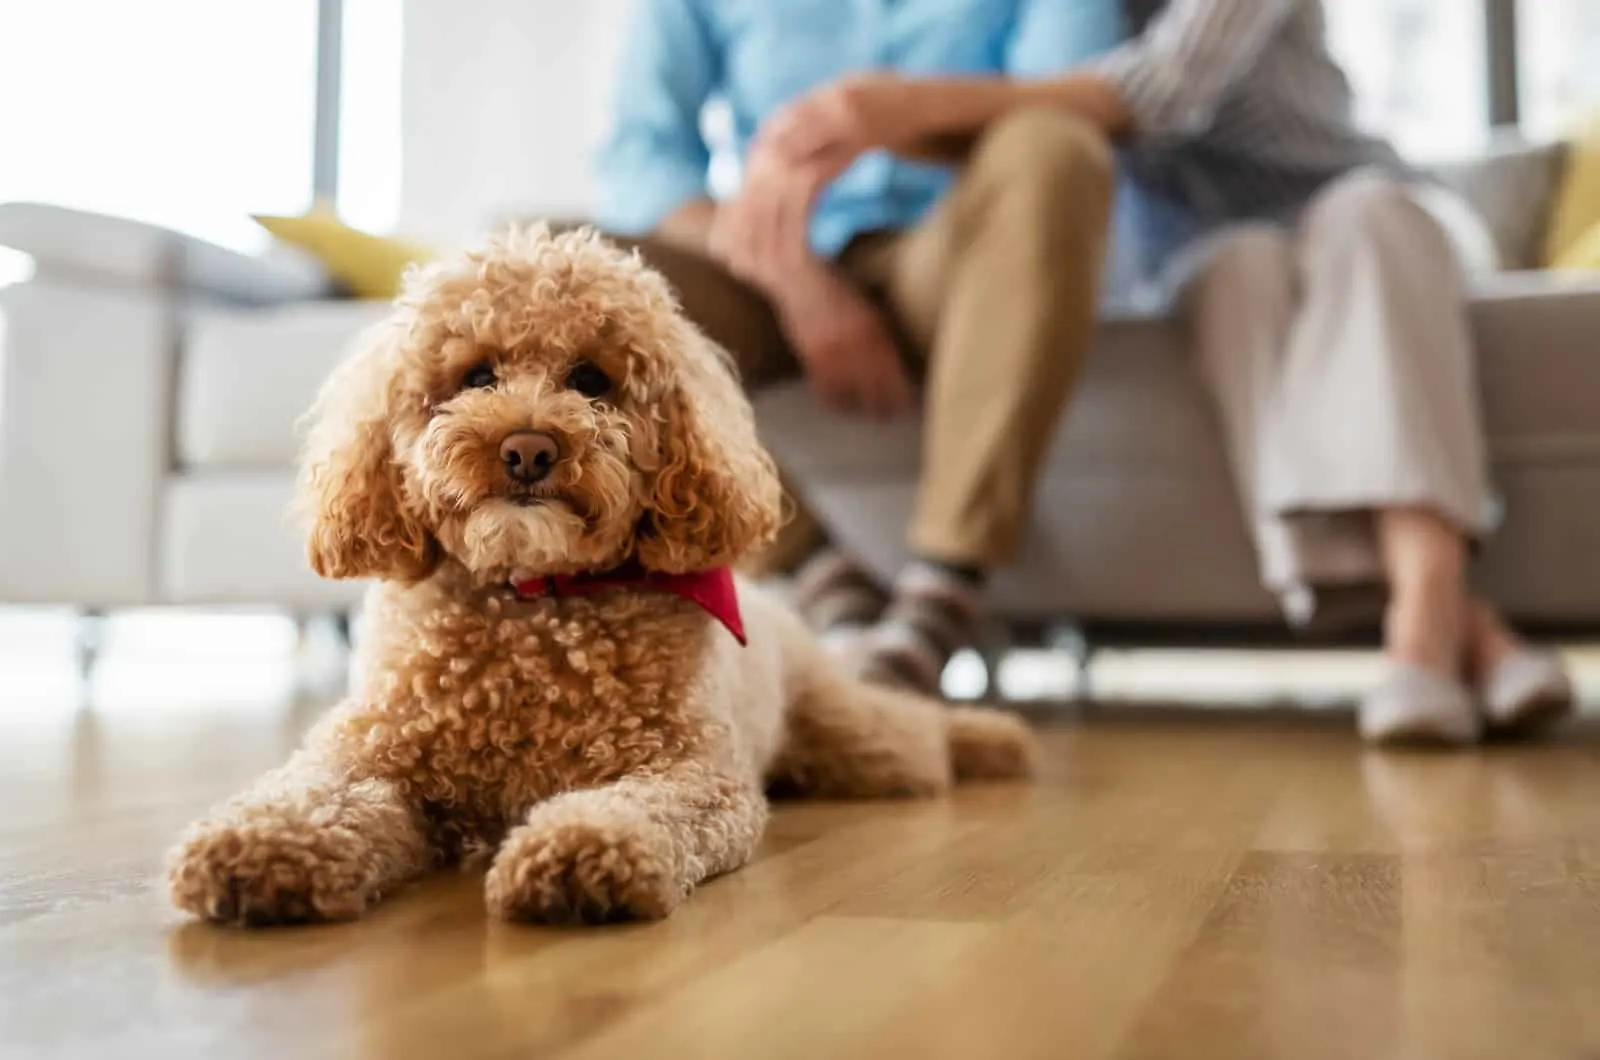 toy poodle pet resting on floor